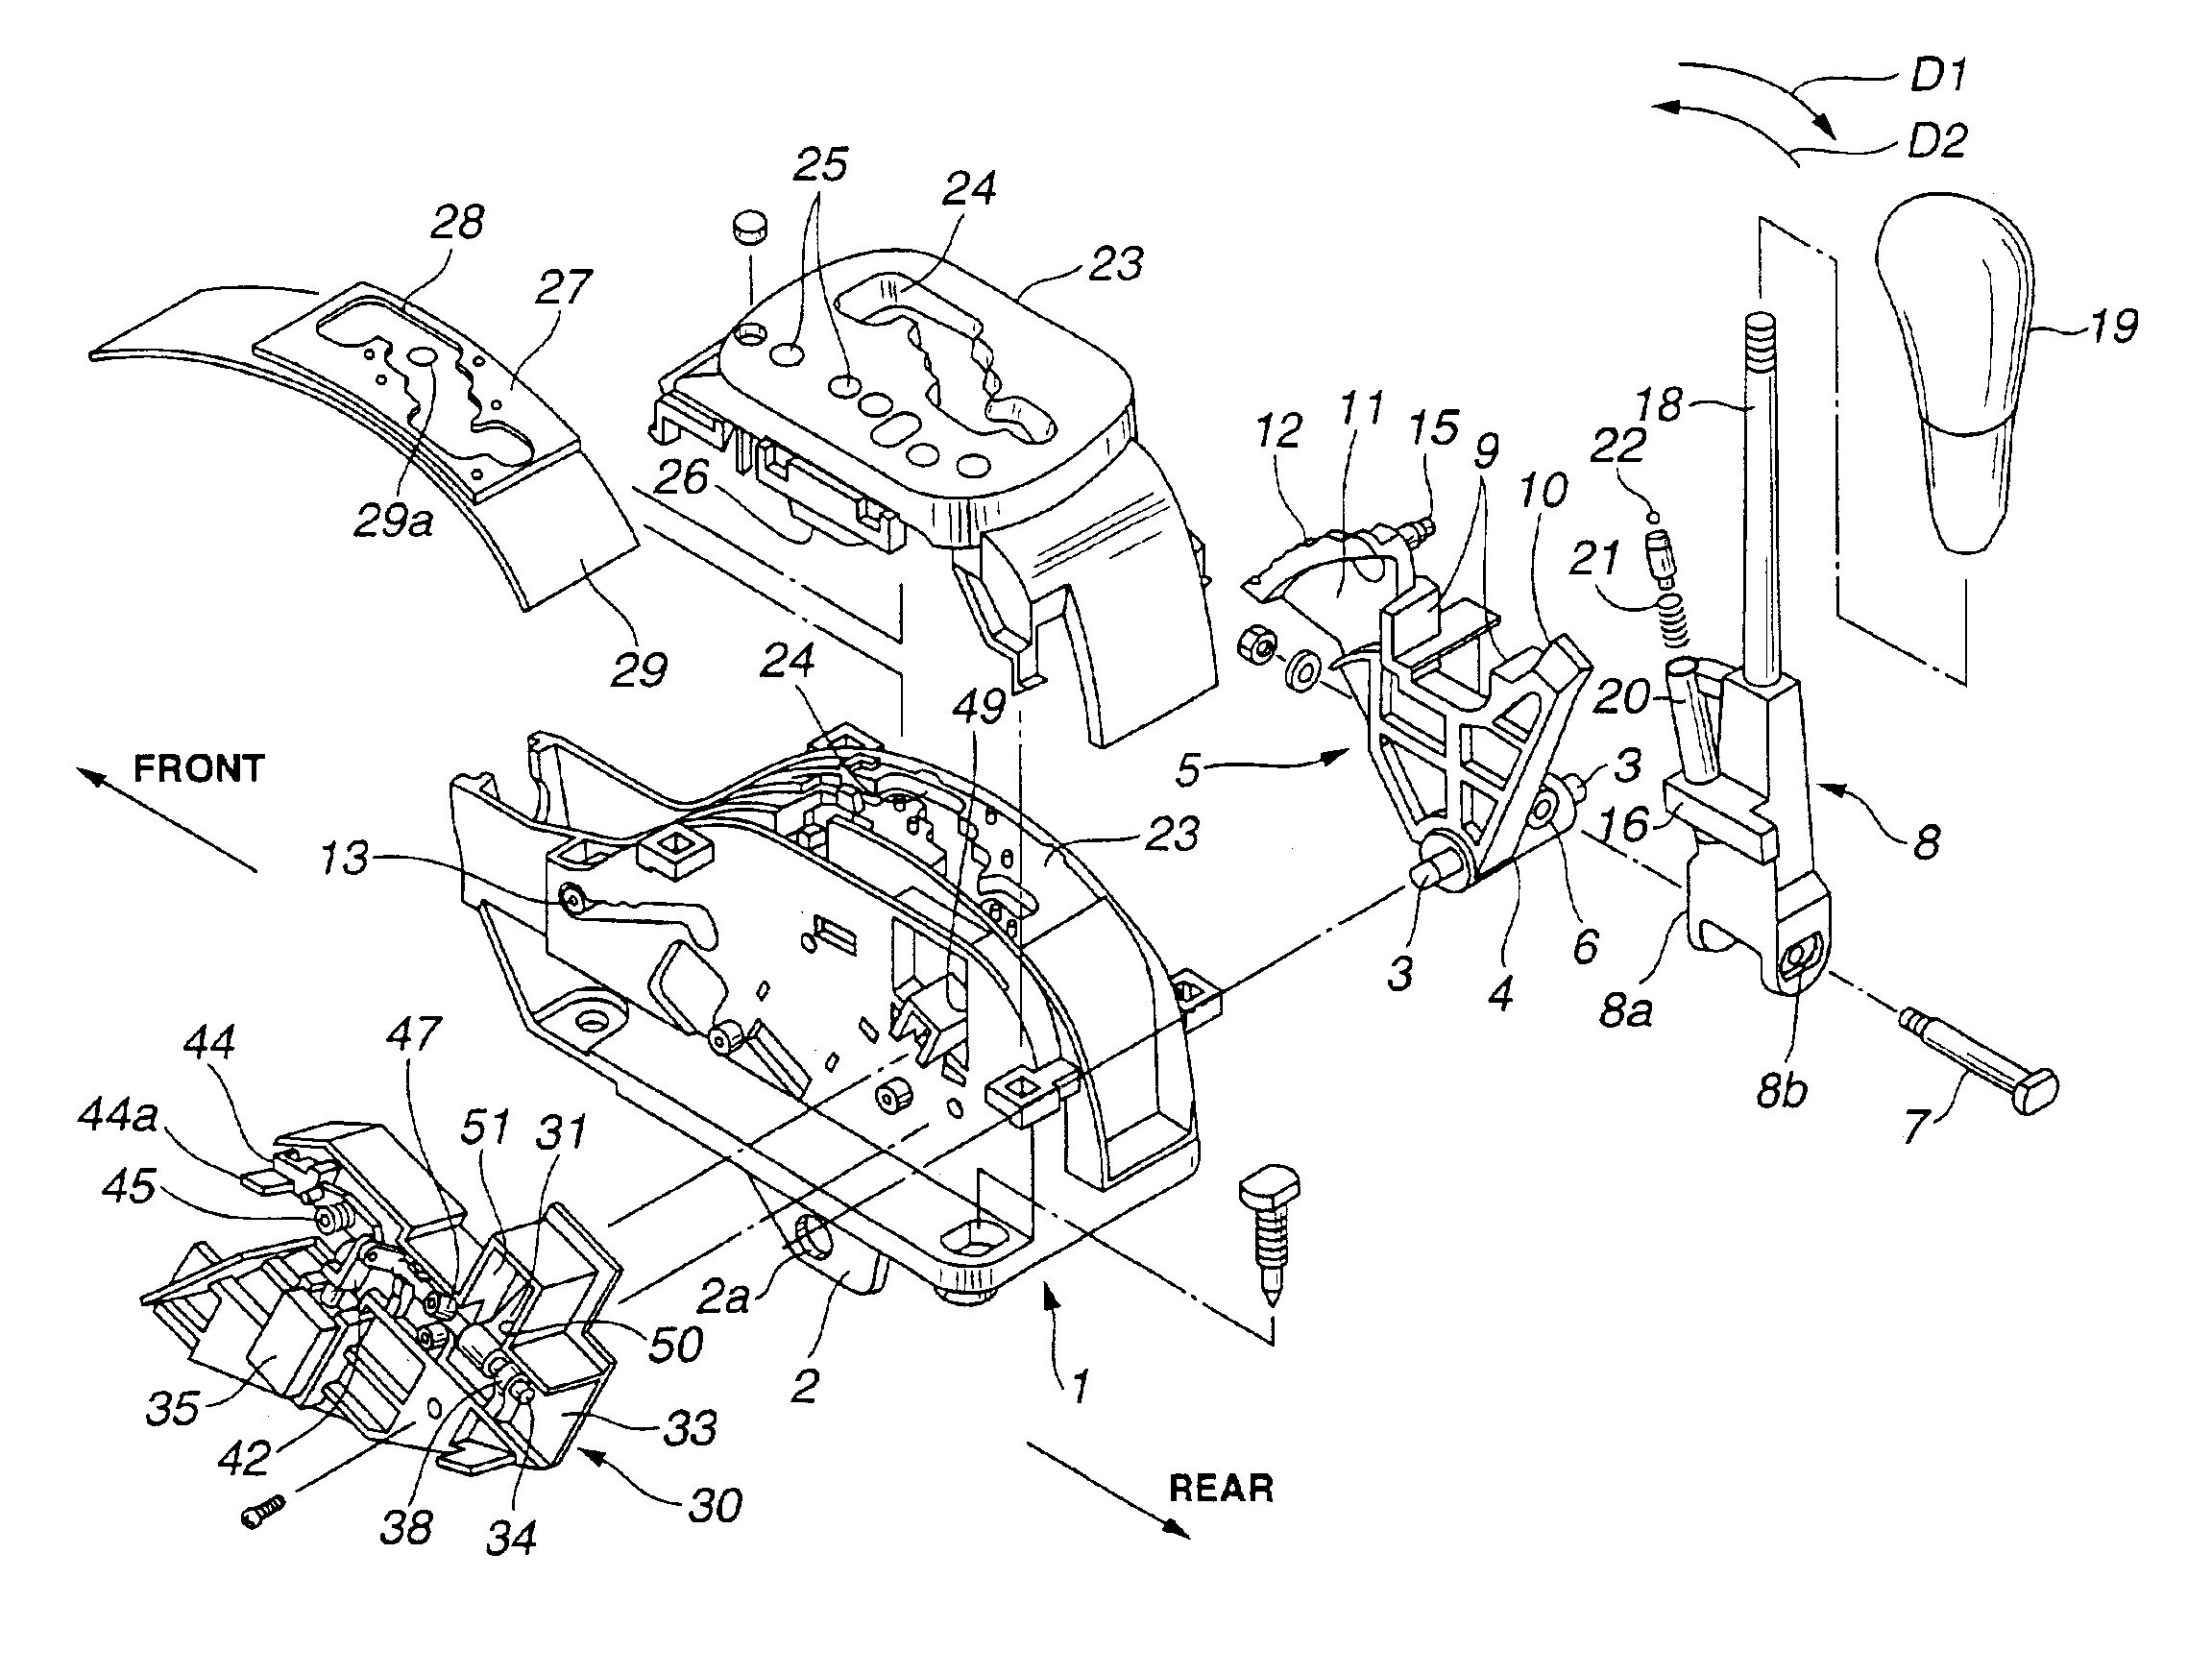 Shift lever device